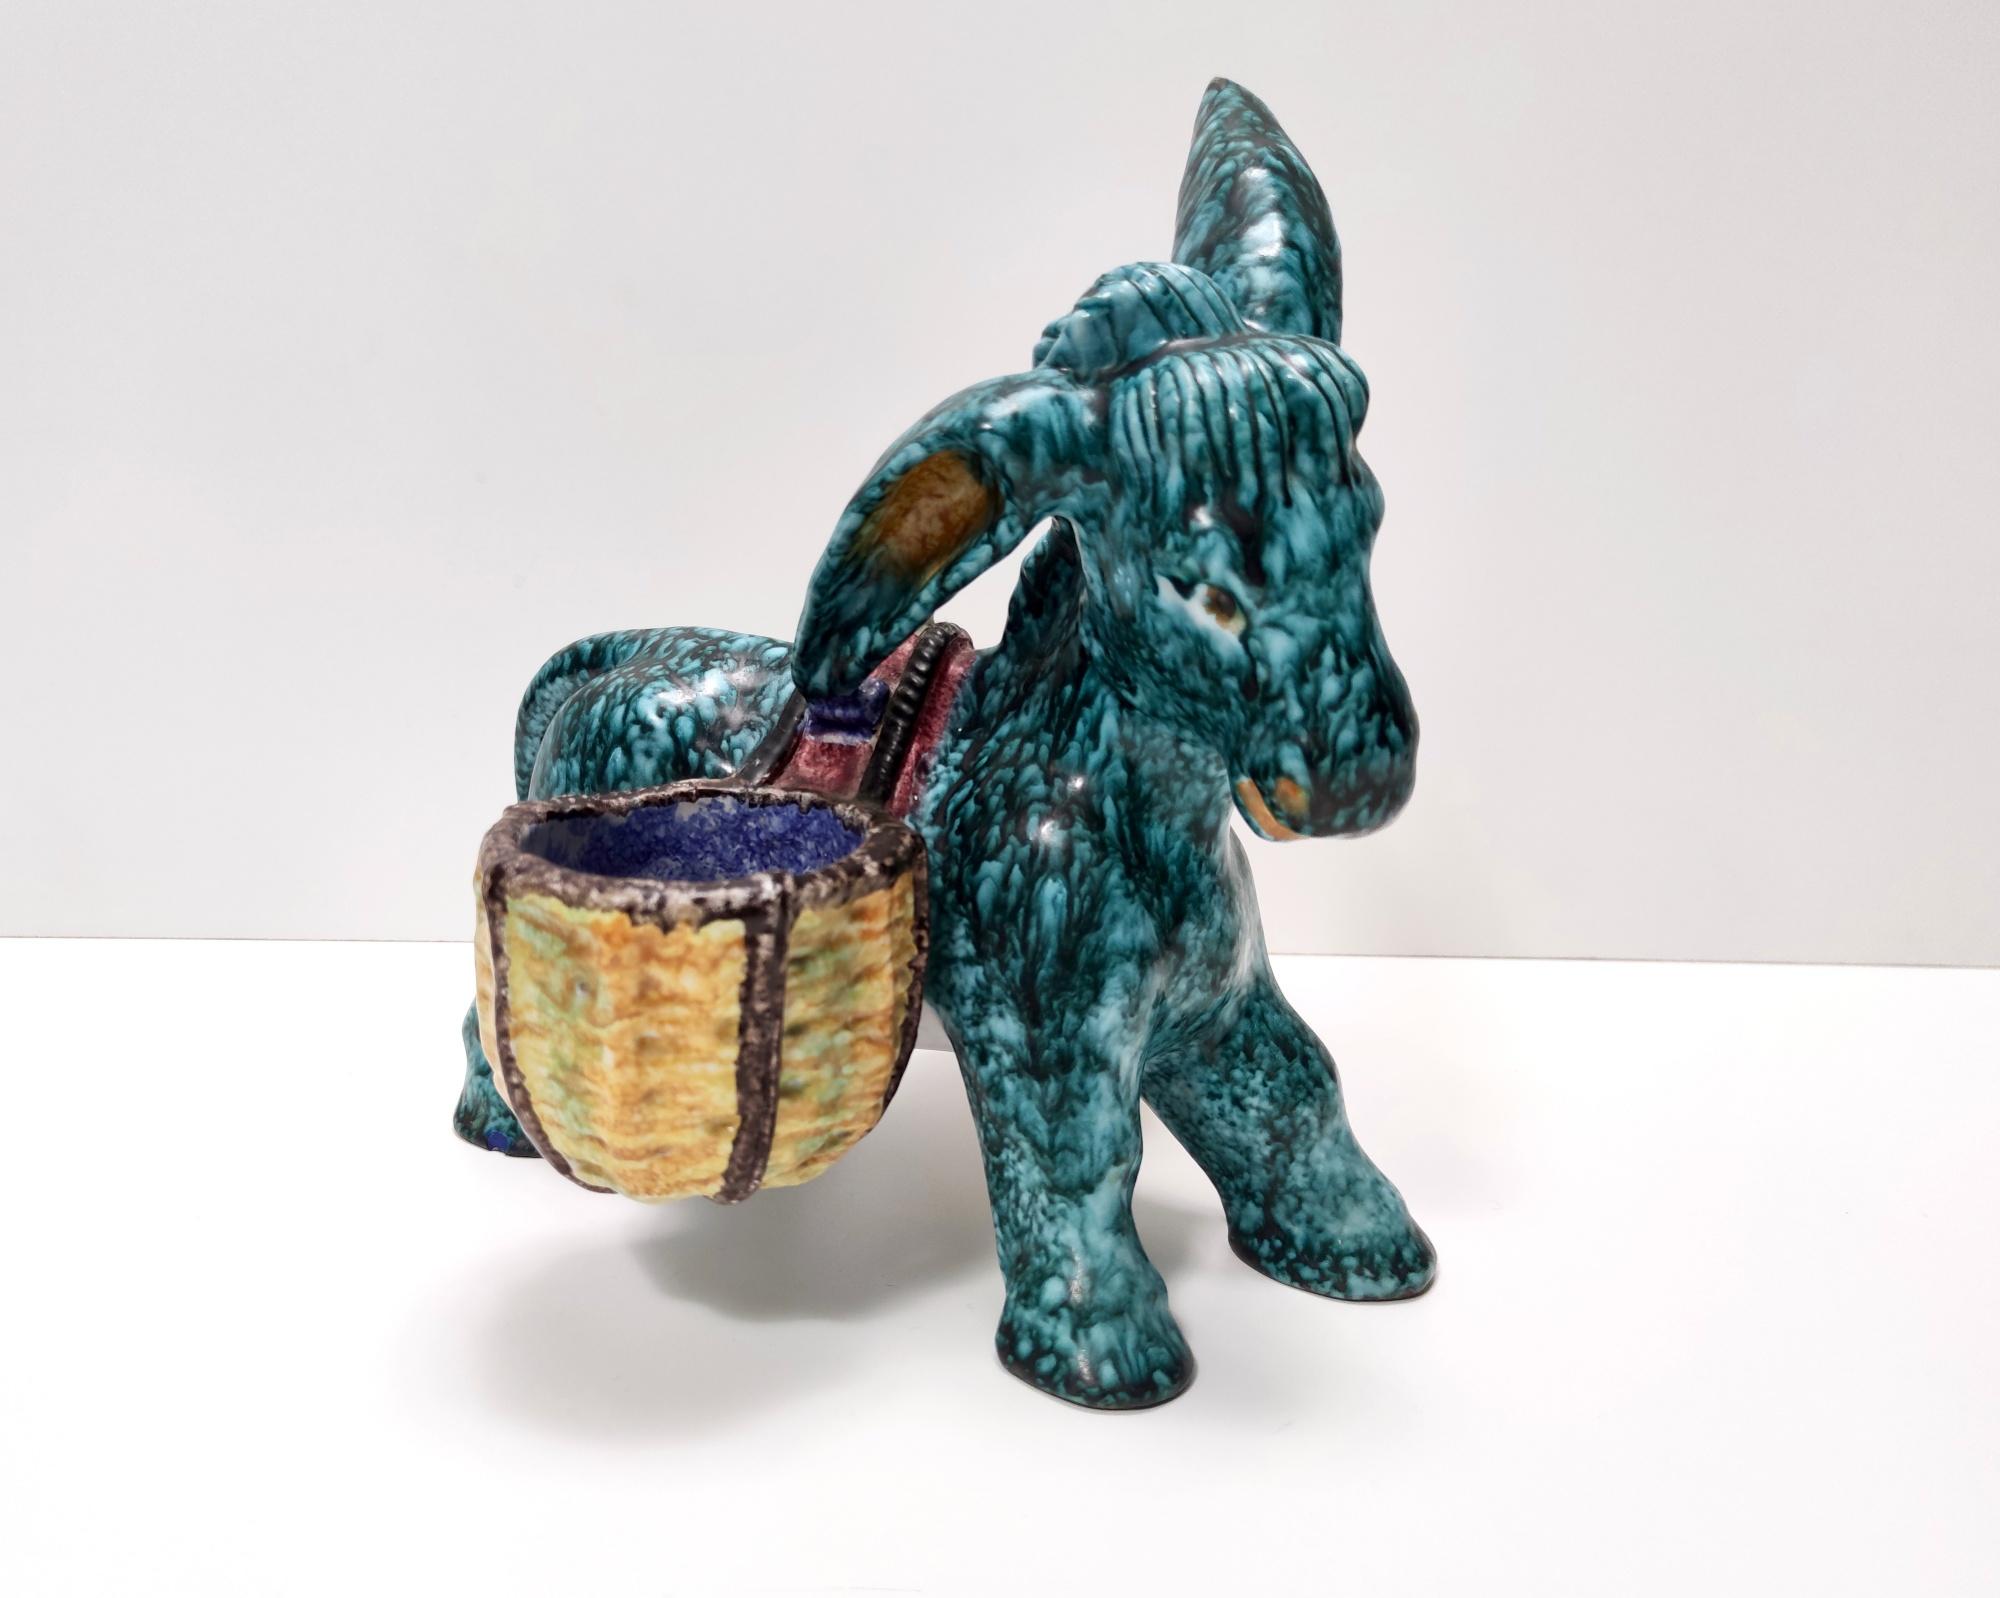 Deruta (Perugia), Italy 1983.
This is a hand-painted earthenware donkey that can be used as a table salt cellar or just as a decorative object. 
It is a vintage piece, therefore it might show slight traces of use, but it can be considered as in